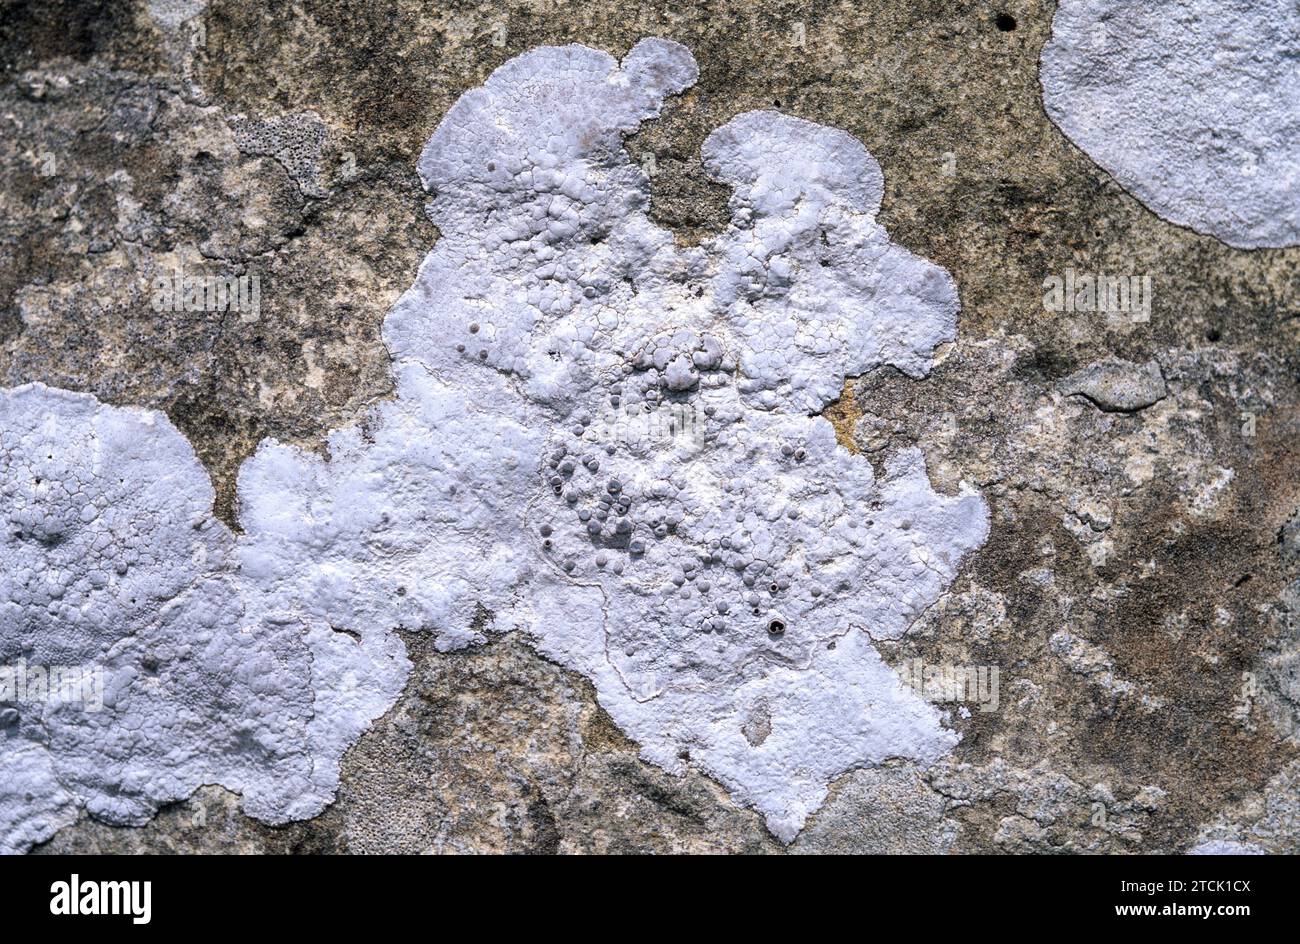 Diploschistes ocellatus is a crustose lichen that grows on calcareous rocks. Stock Photo